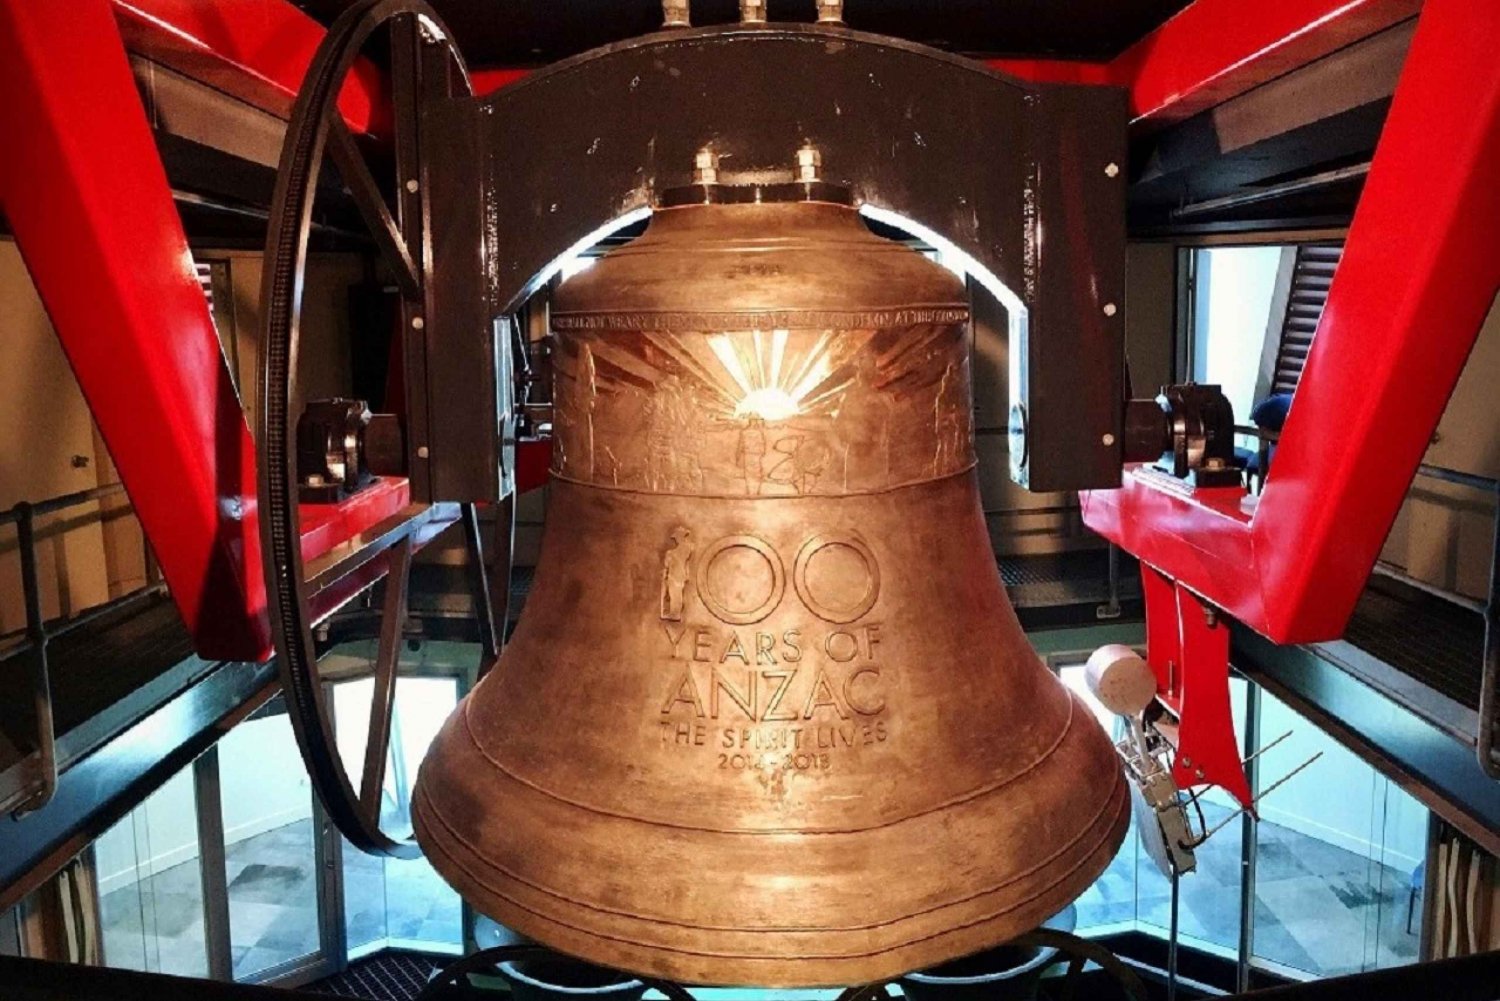 Perth: The Premium Anzac Bell Tour at the Bell Tower